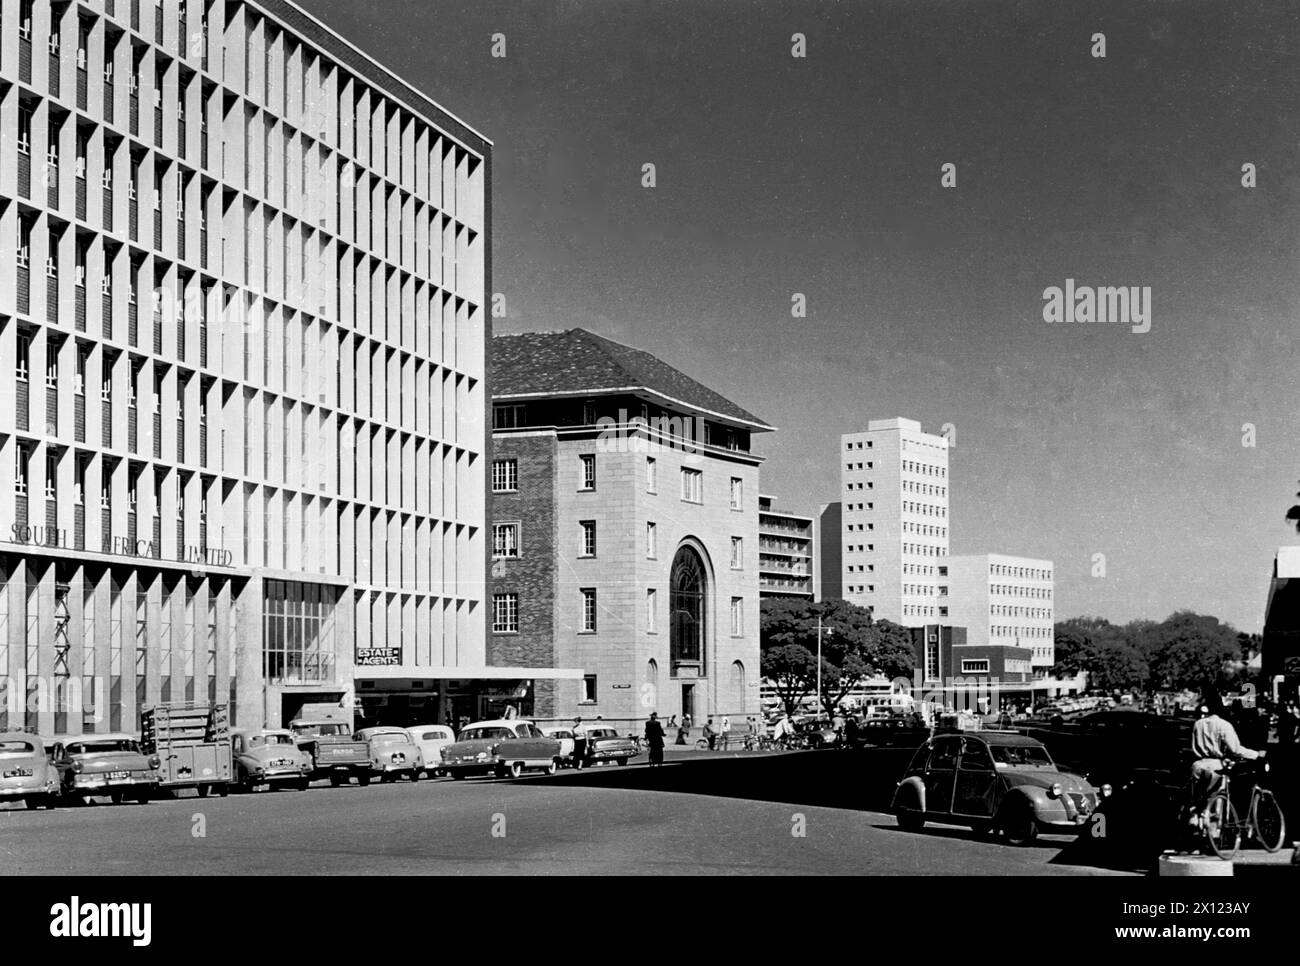 Modern Town Centre or City Centre in Salisbury Rhodesia, now Harare, Zimbabwe. Vintage or Historic Monochrome or Black and White Image c1960 Stock Photo